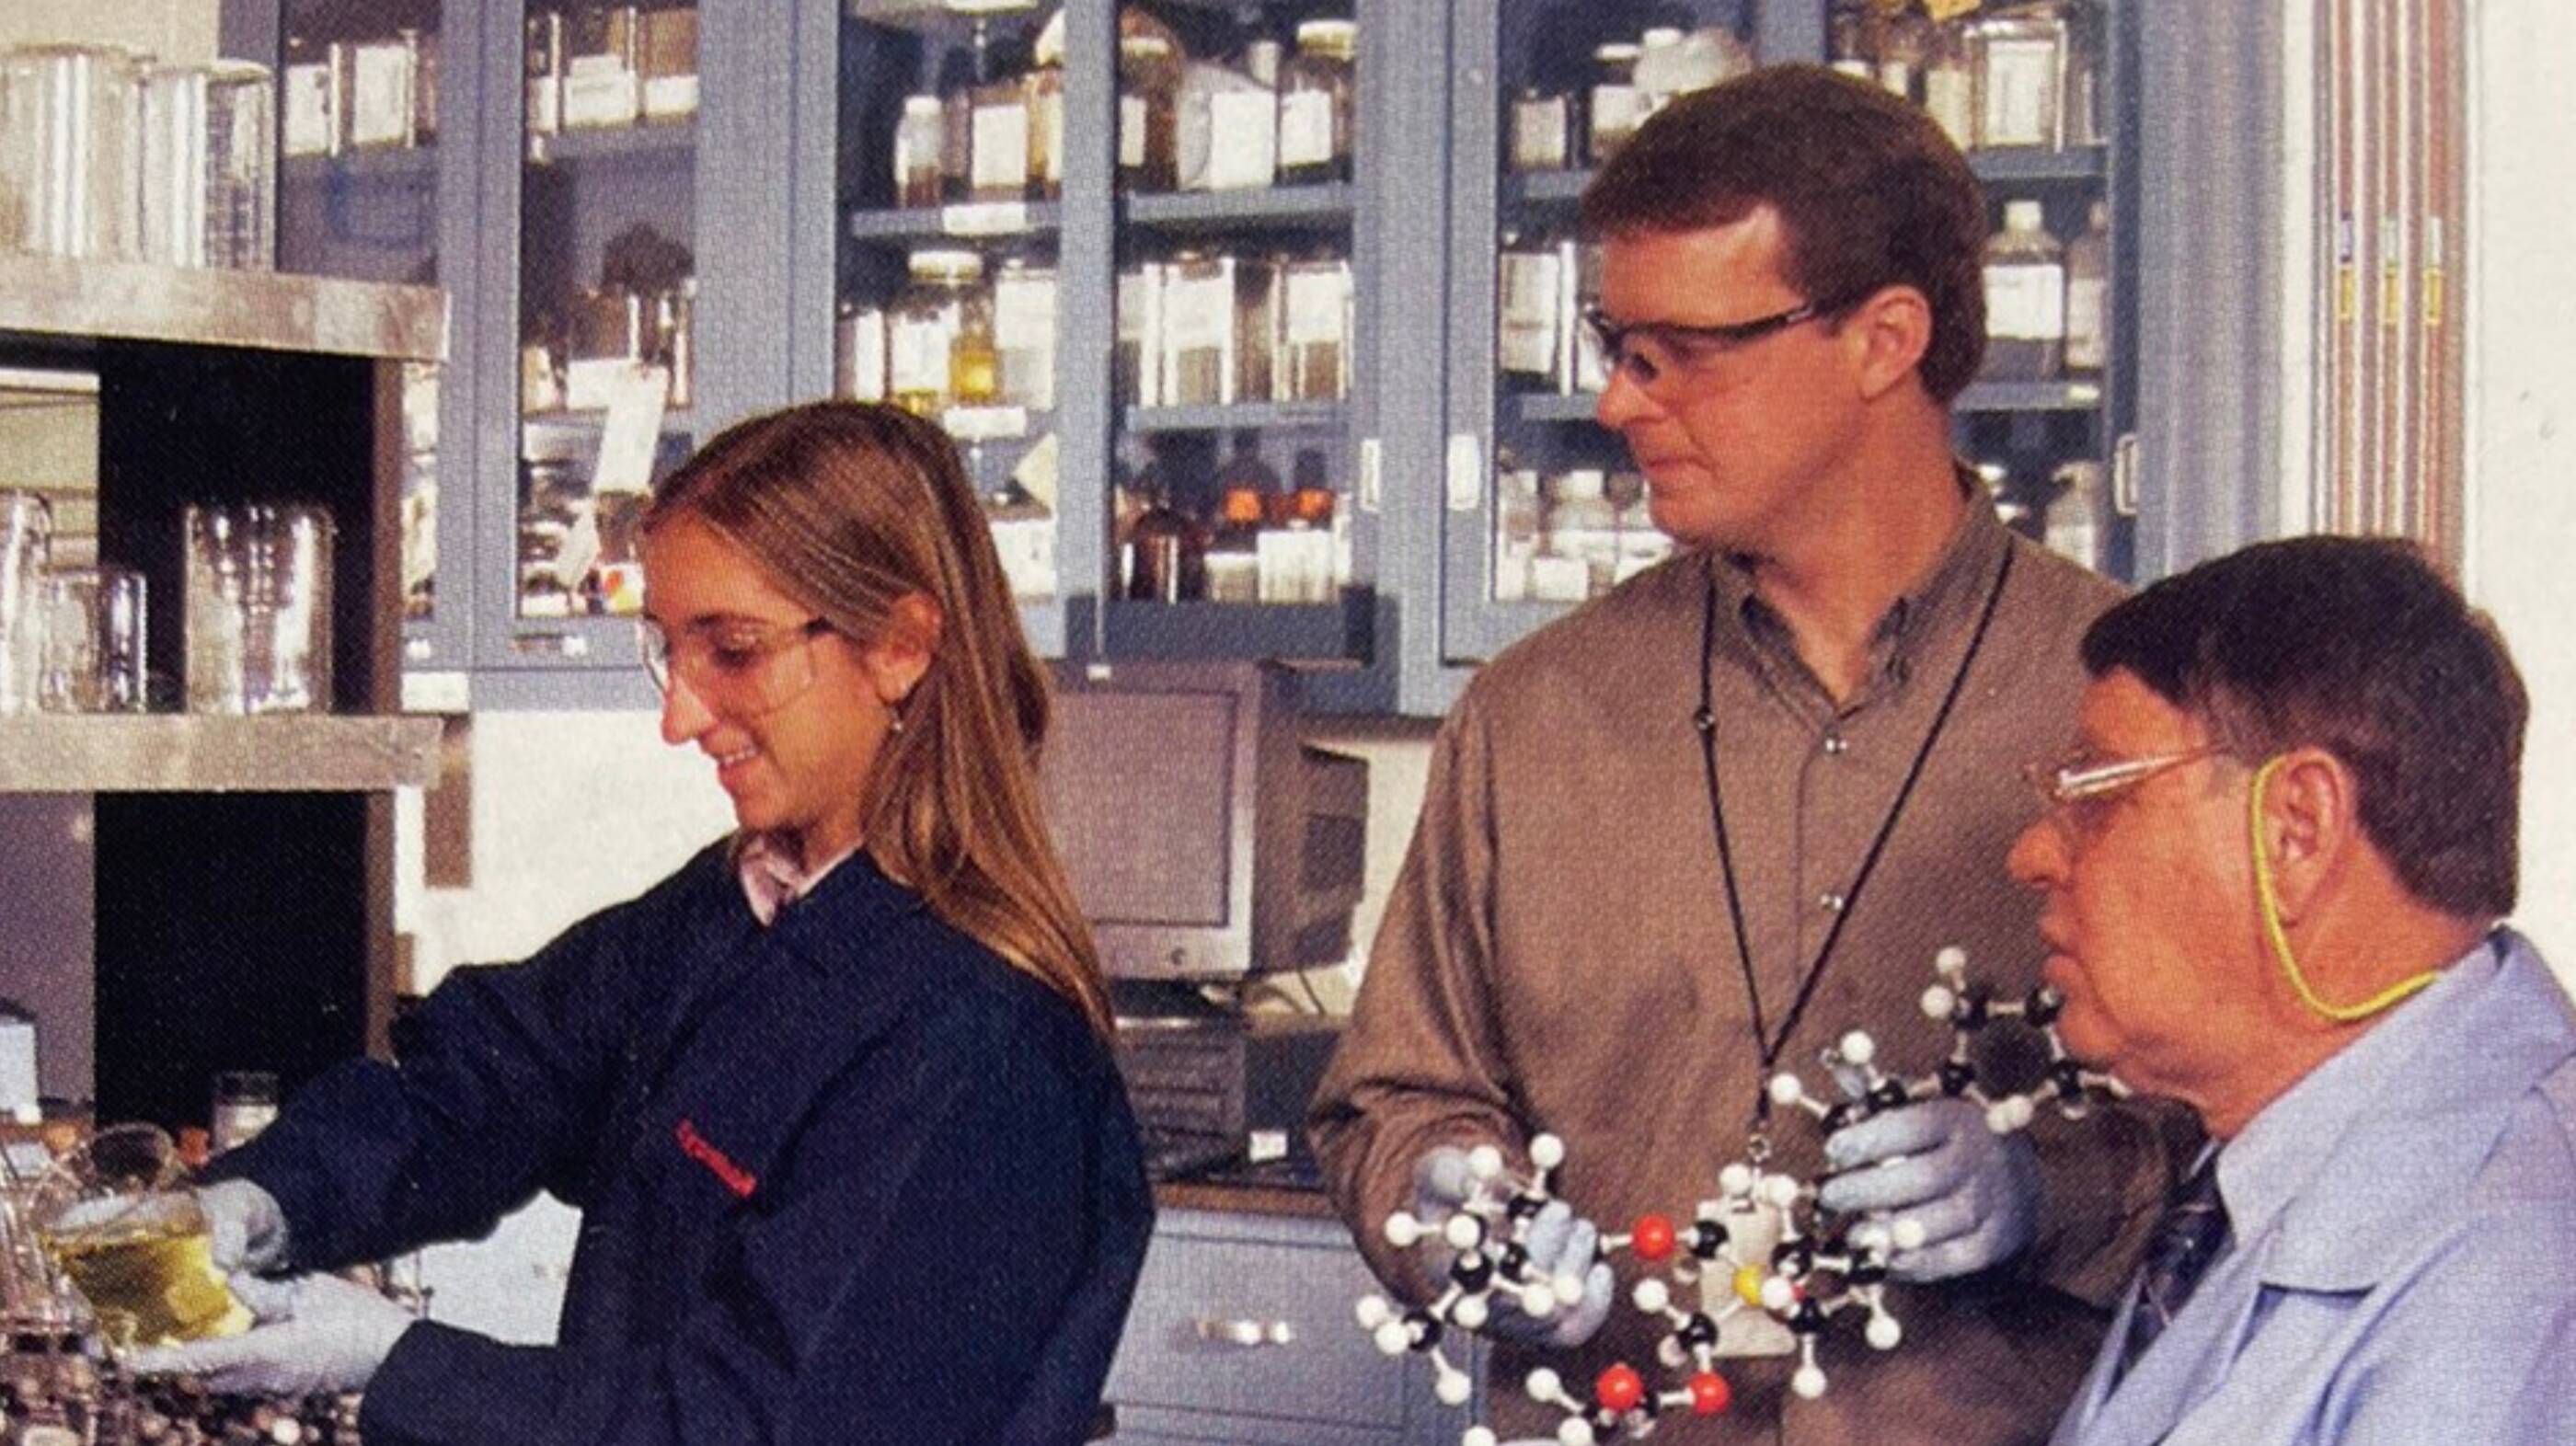 Image Brianne and colleagues experimenting with oil fluids early in her career. This photo was originally published in The Lamp in 2004.